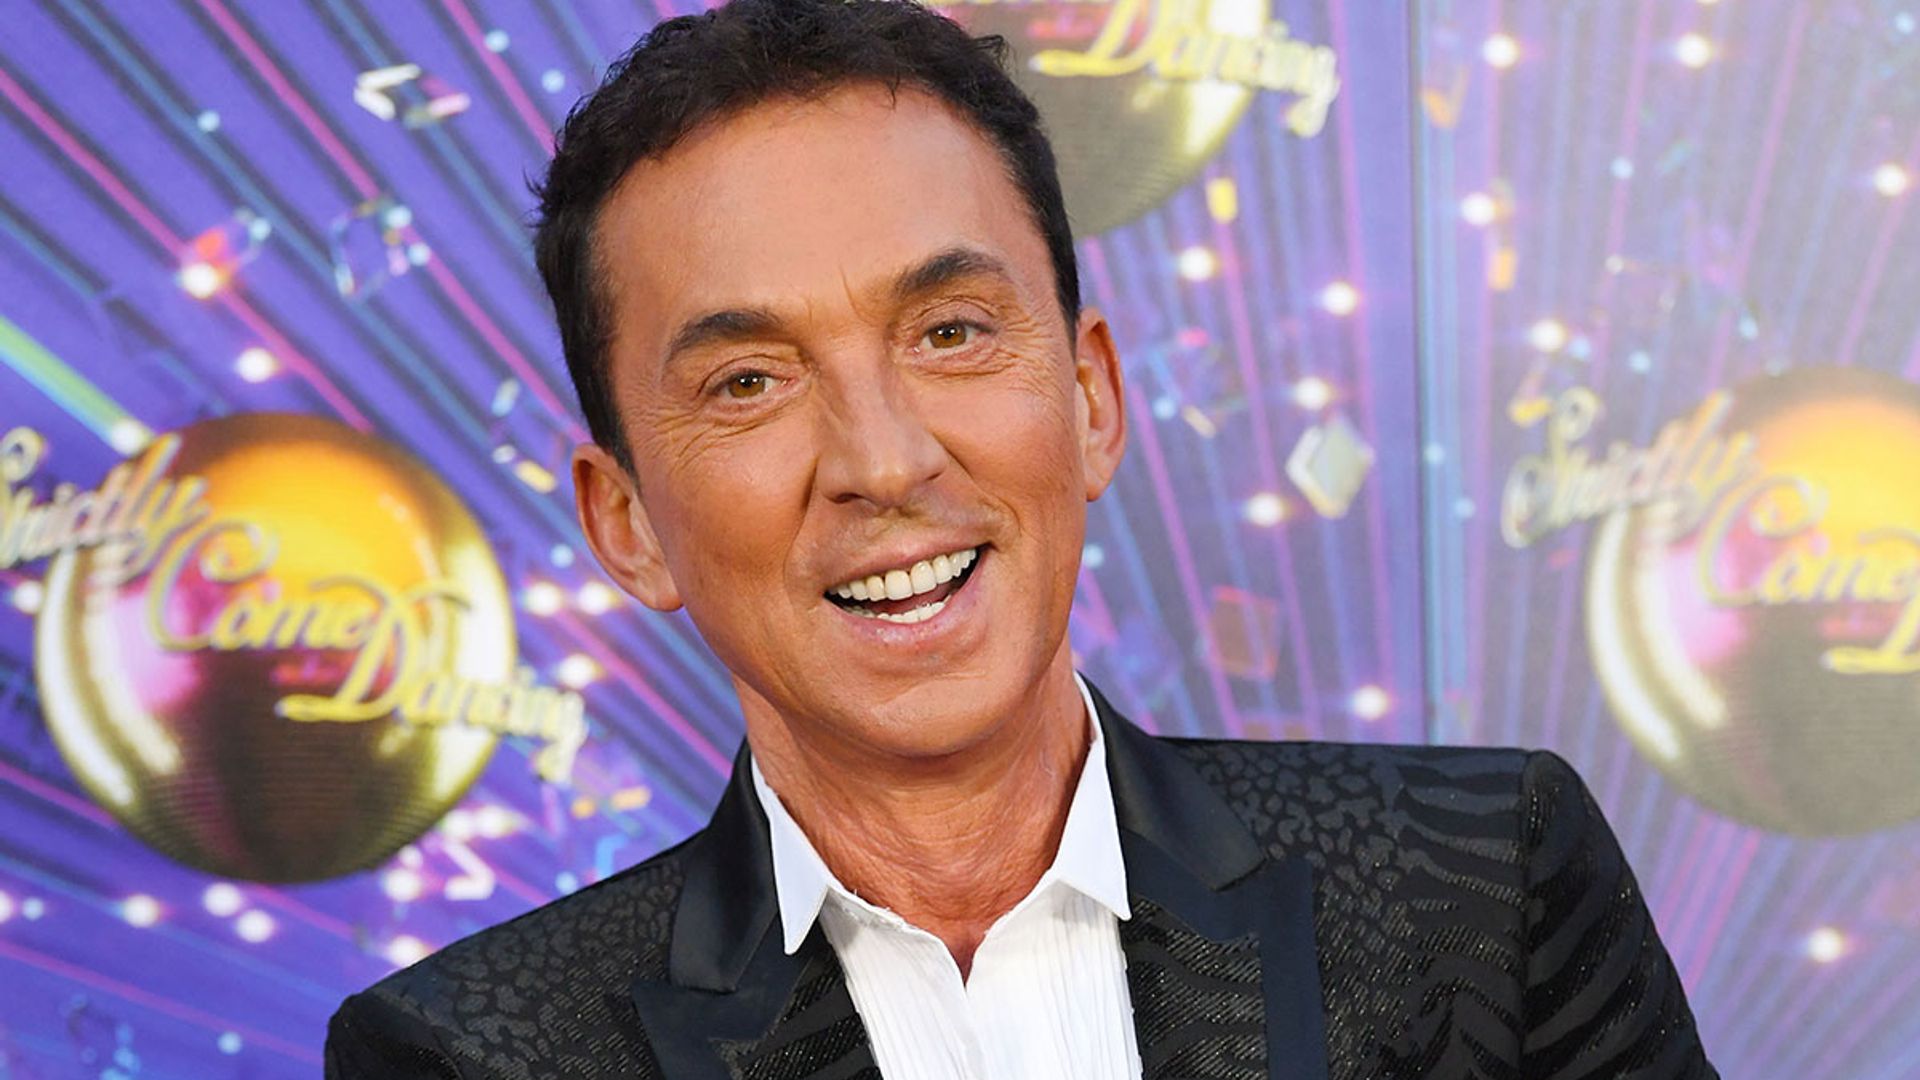 Strictly Come Dancing 2020: Why Bruno Tonioli is not judging this year.